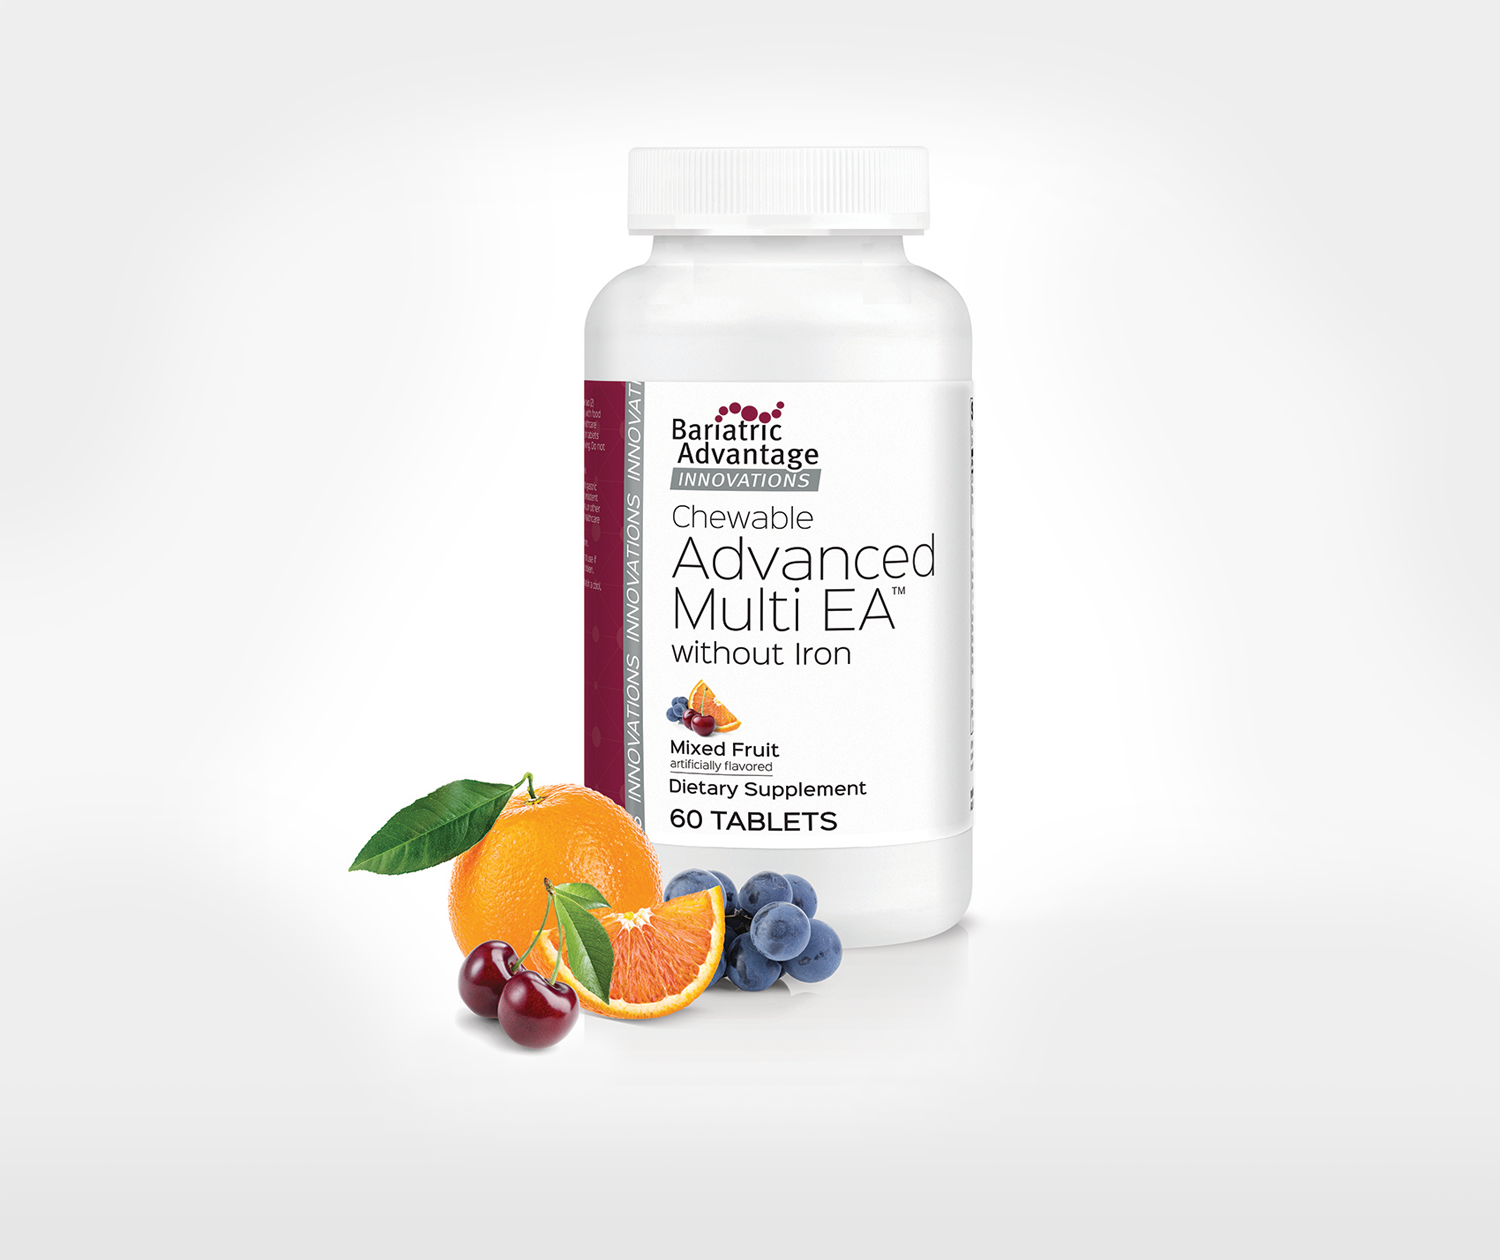 Advanced Multi EA without Iron: Your favorite chewable multivitamin